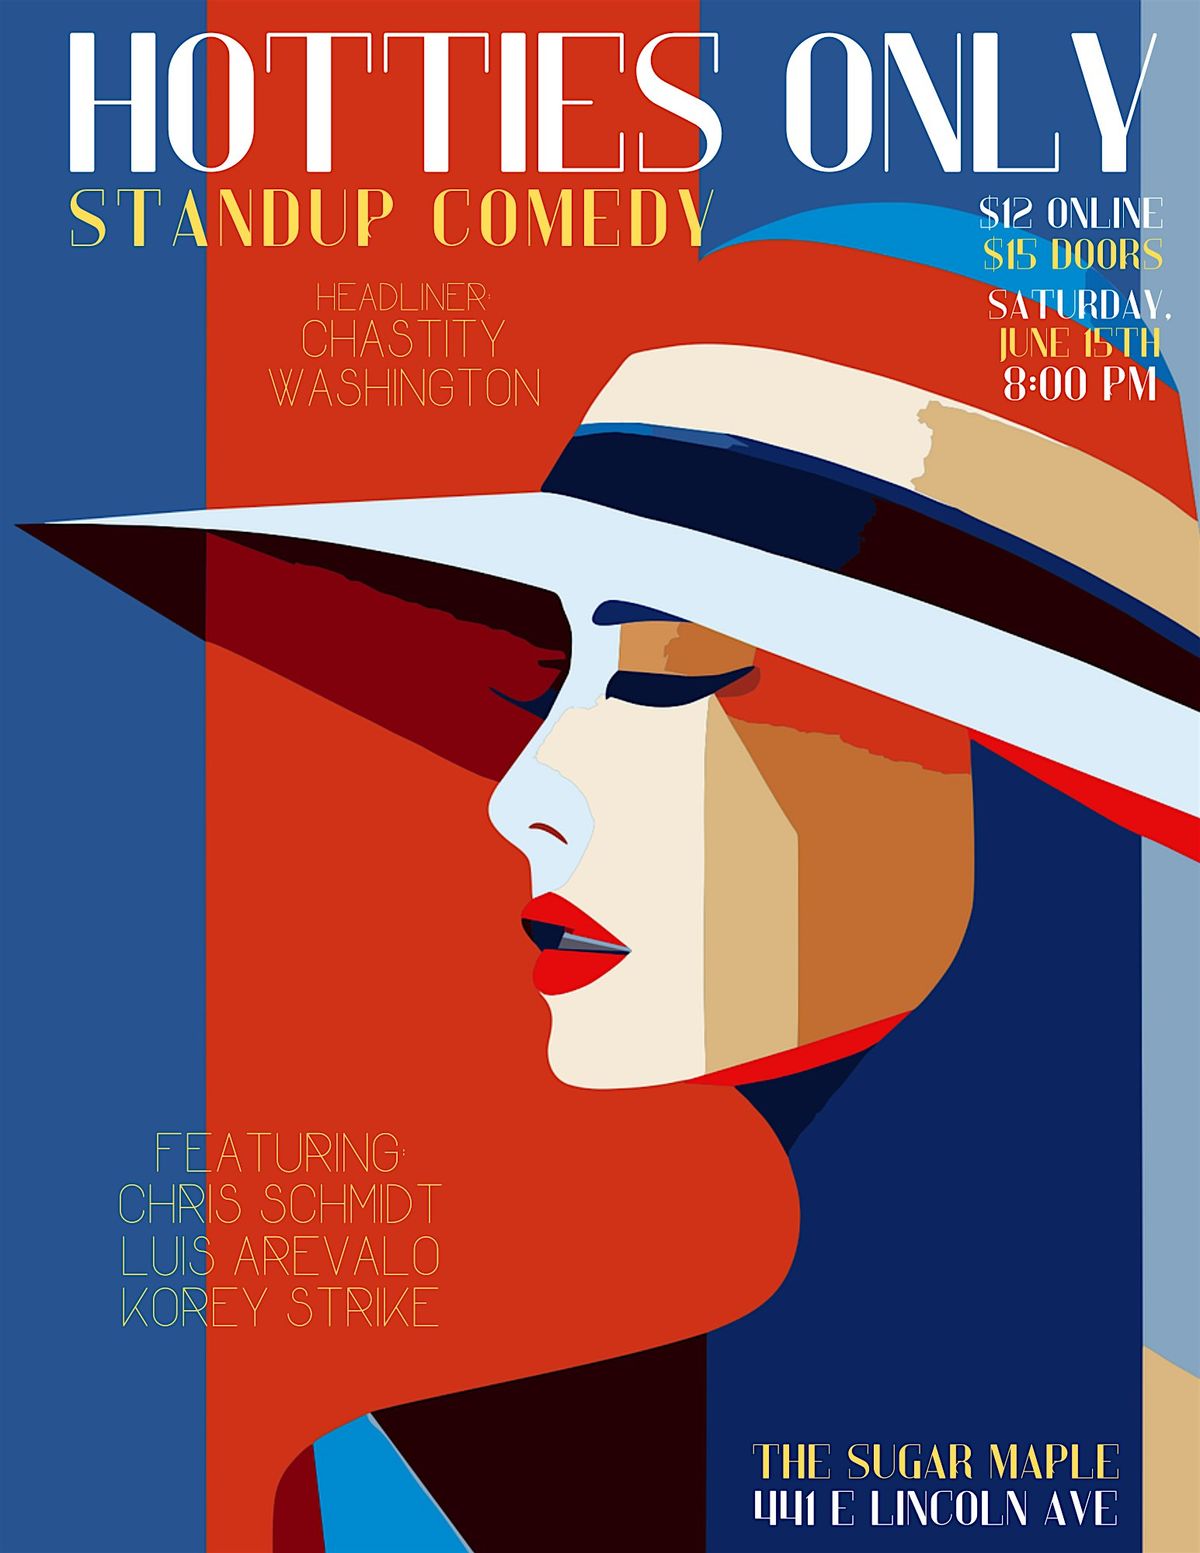 Hotties Only Standup Comedy: Chastity Washington At Sugar Maple